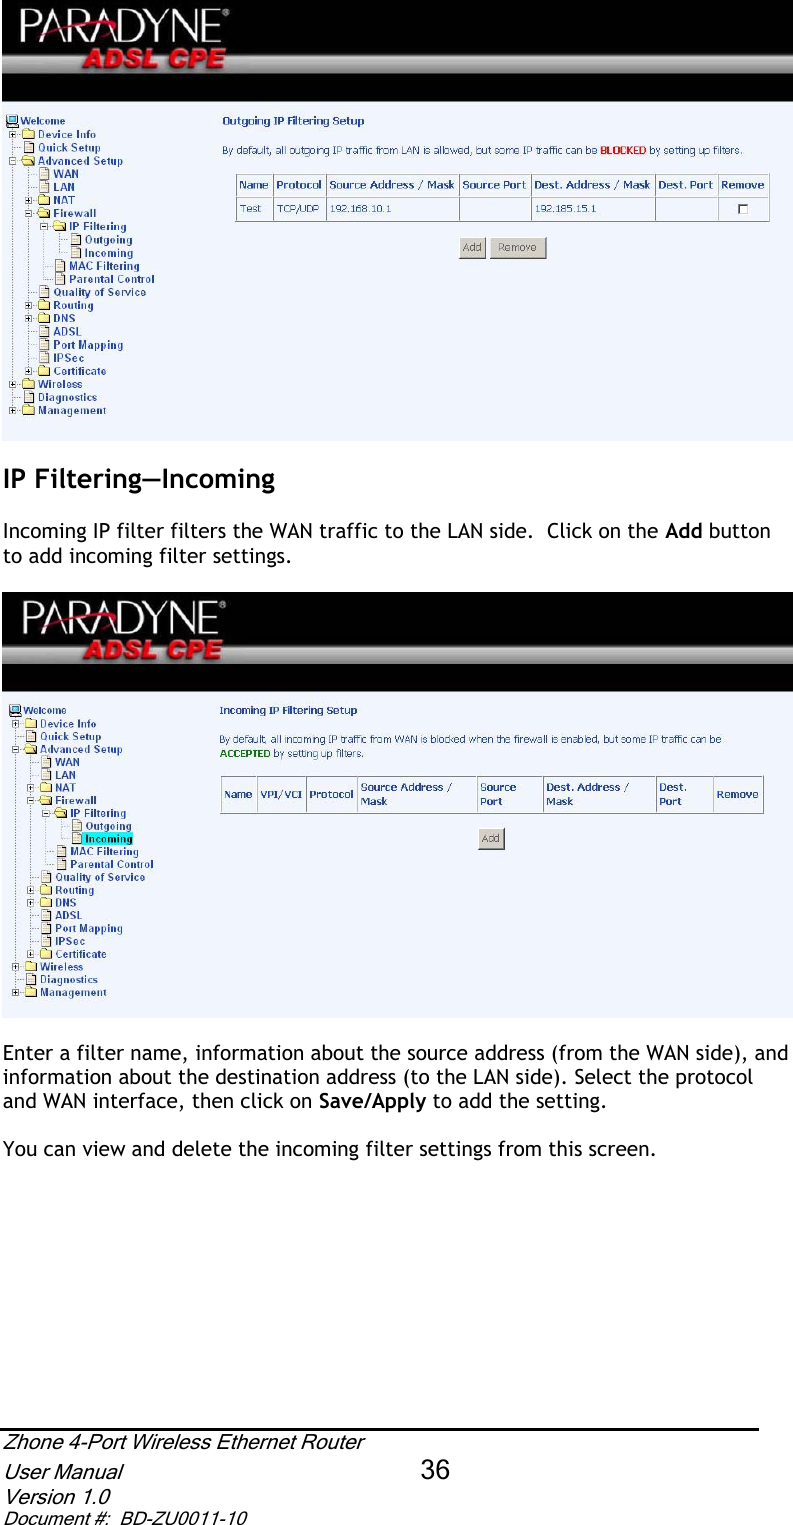 IP Filtering—IncomingIncoming IP filter filters the WAN traffic to the LAN side.  Click on the Add buttonto add incoming filter settings.  Enter a filter name, information about the source address (from the WAN side), and information about the destination address (to the LAN side). Select the protocol and WAN interface, then click on Save/Apply to add the setting. You can view and delete the incoming filter settings from this screen. Zhone 4-Port Wireless Ethernet Router User Manual 36Version 1.0 Document #:  BD-ZU0011-10